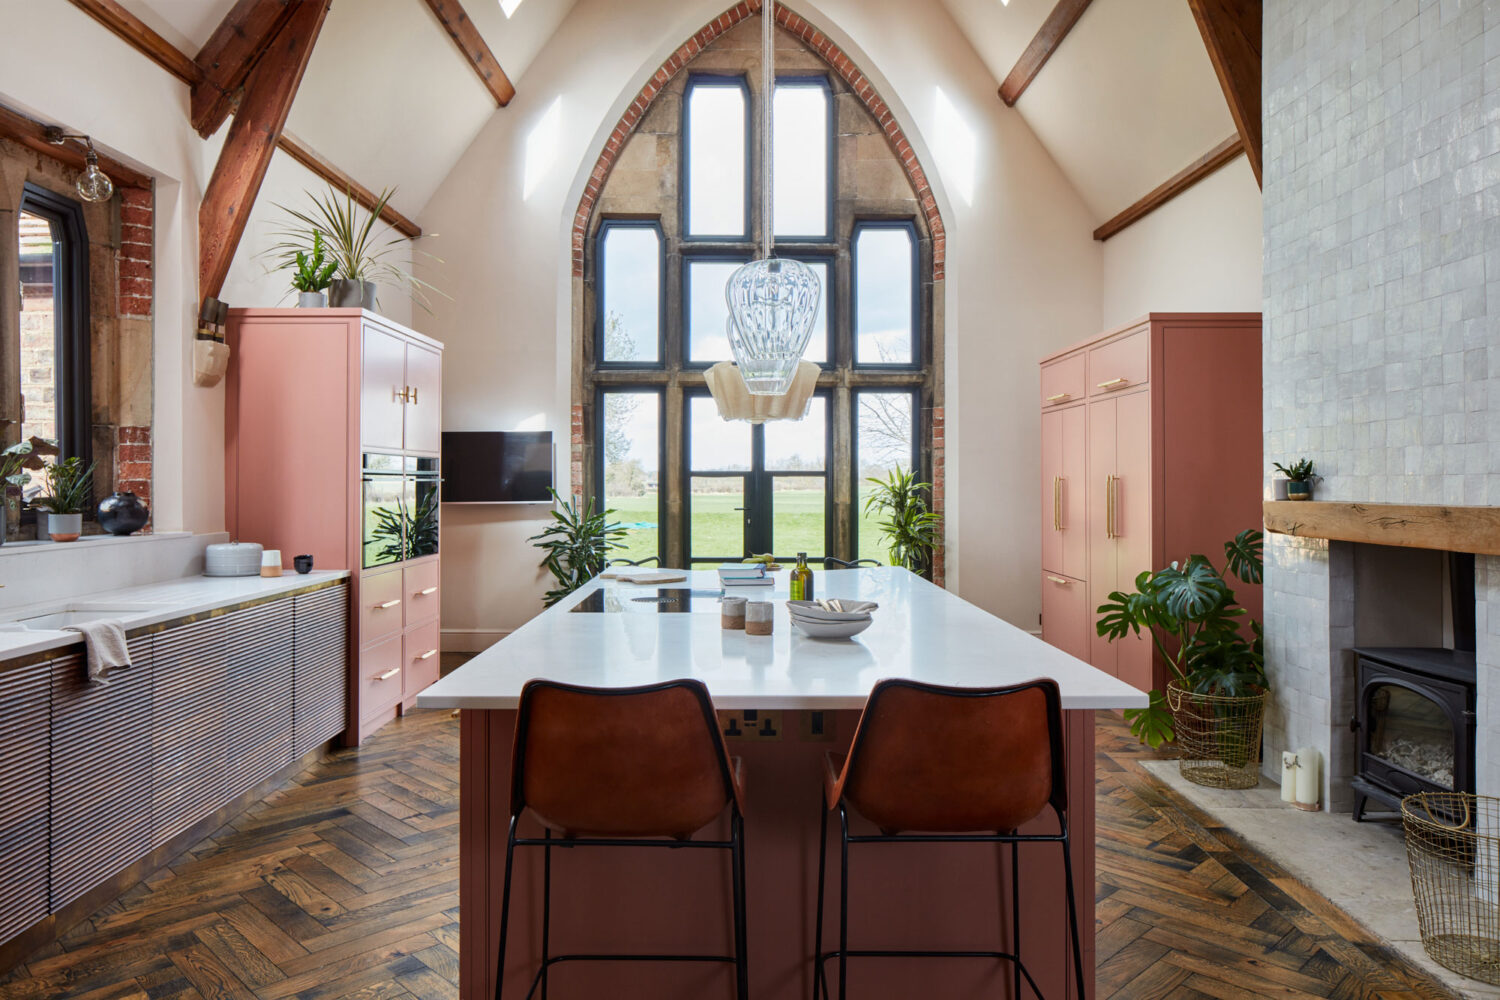 high ceiling room with an island kitchen